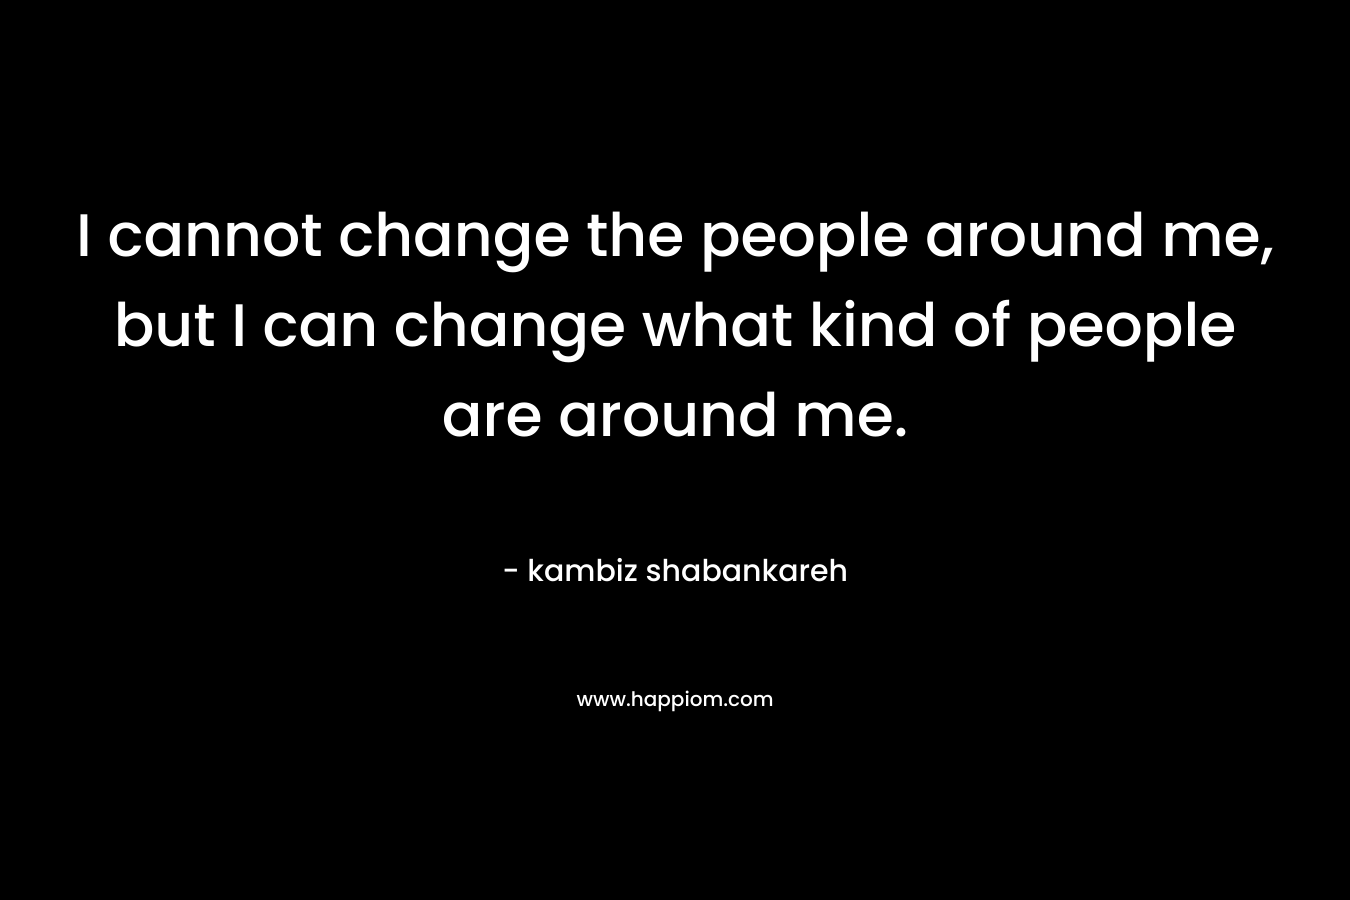 I cannot change the people around me, but I can change what kind of people are around me.